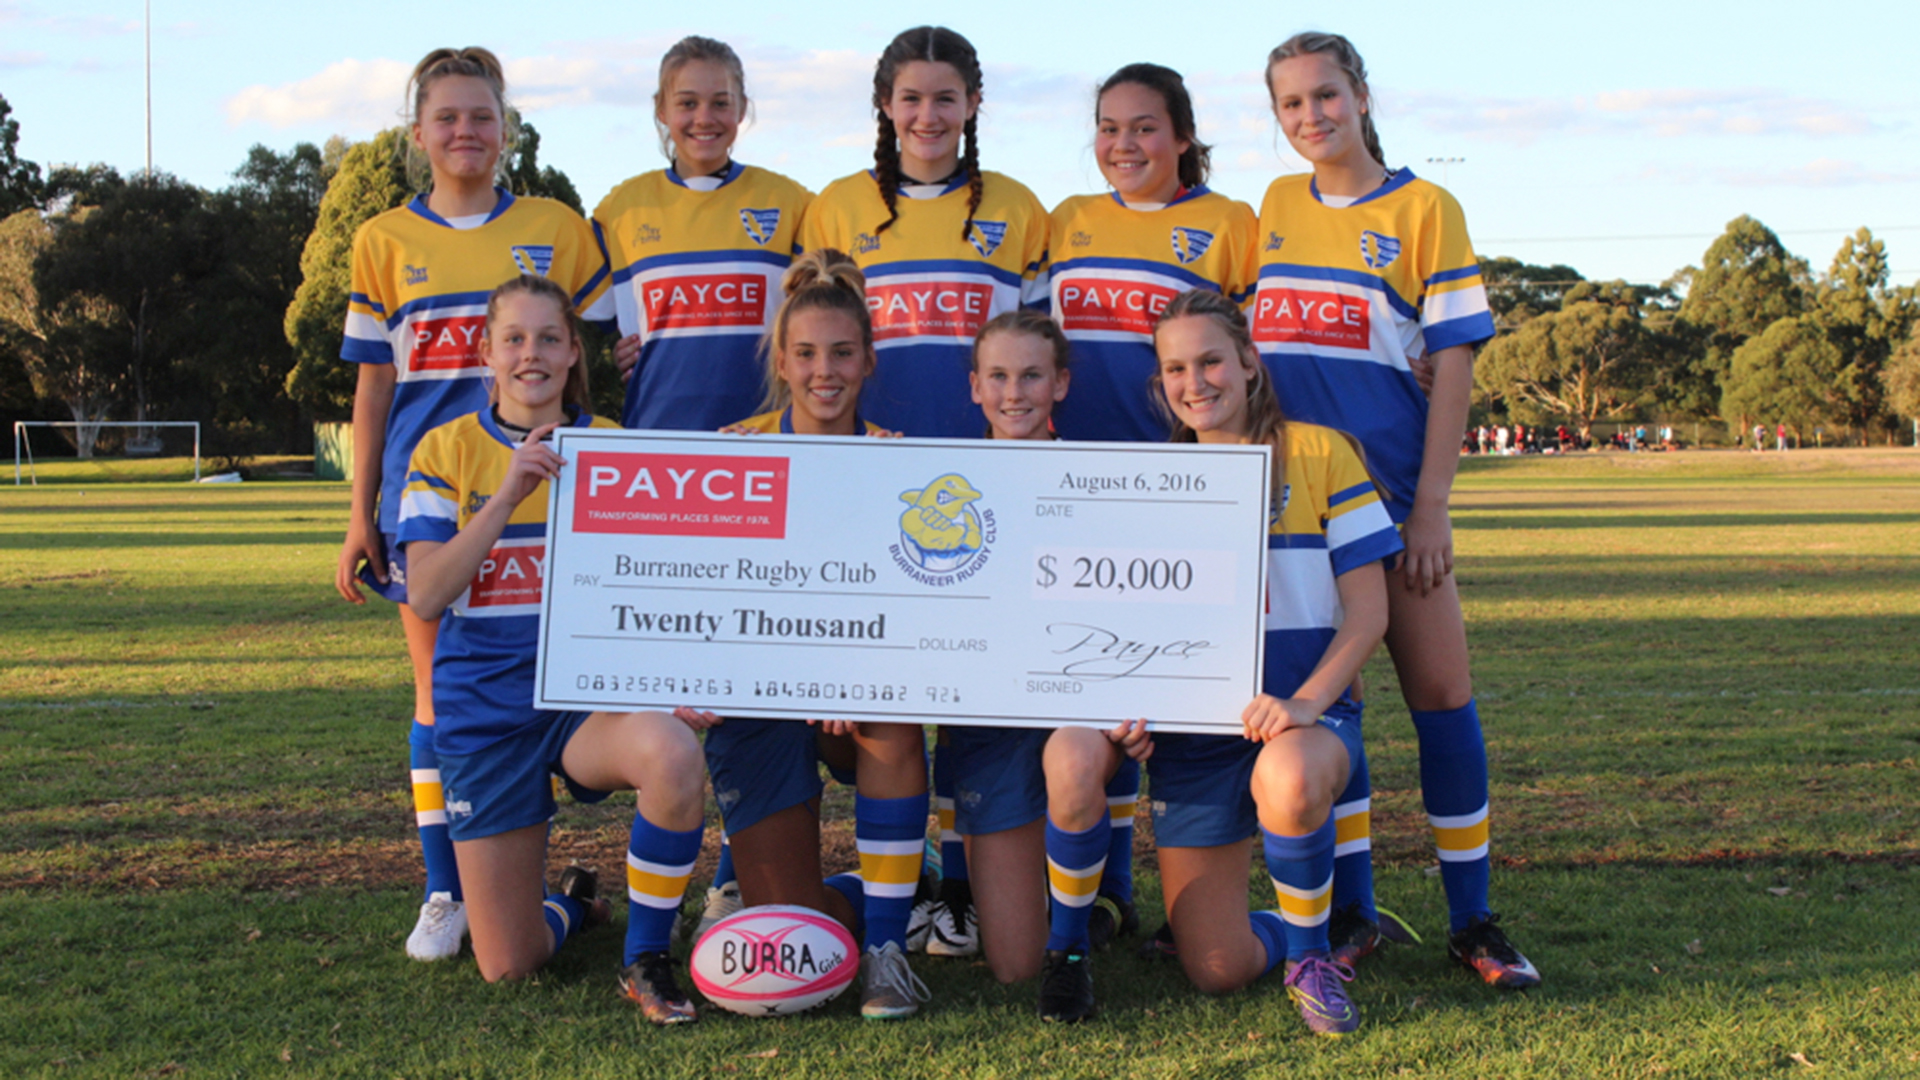 Burra Rugby’s big win with new PAYCE sponsorship